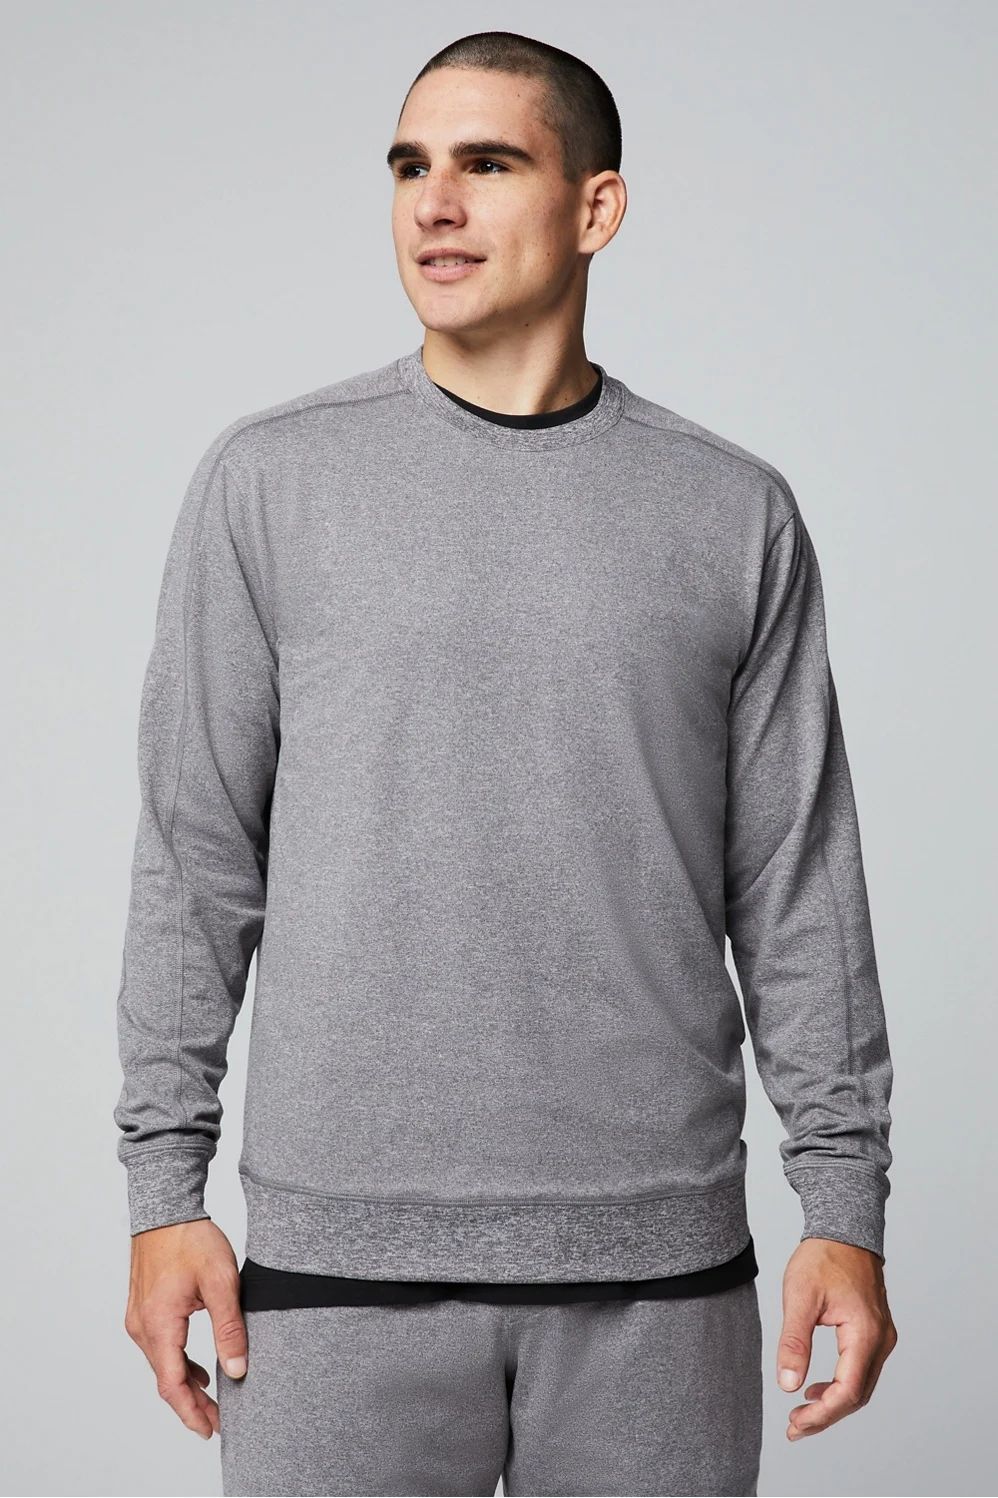 The Cloud Jersey Long Sleeve Tee | Fabletics - North America